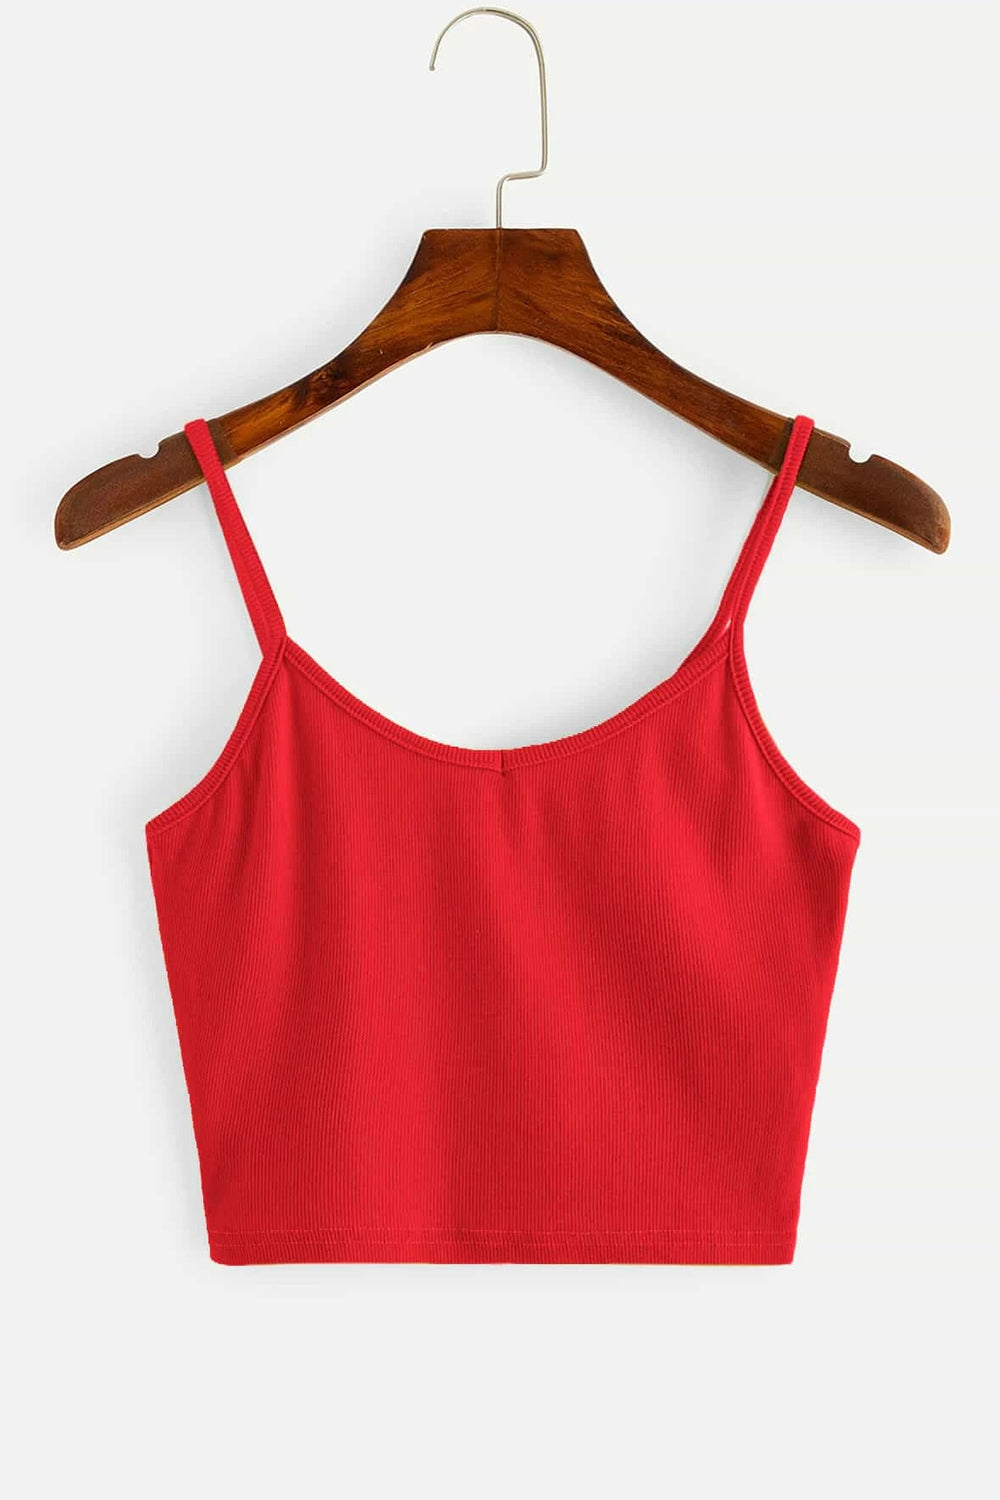 Japna, Tops, Red Crocheted Eyelet Cotton Cami Top